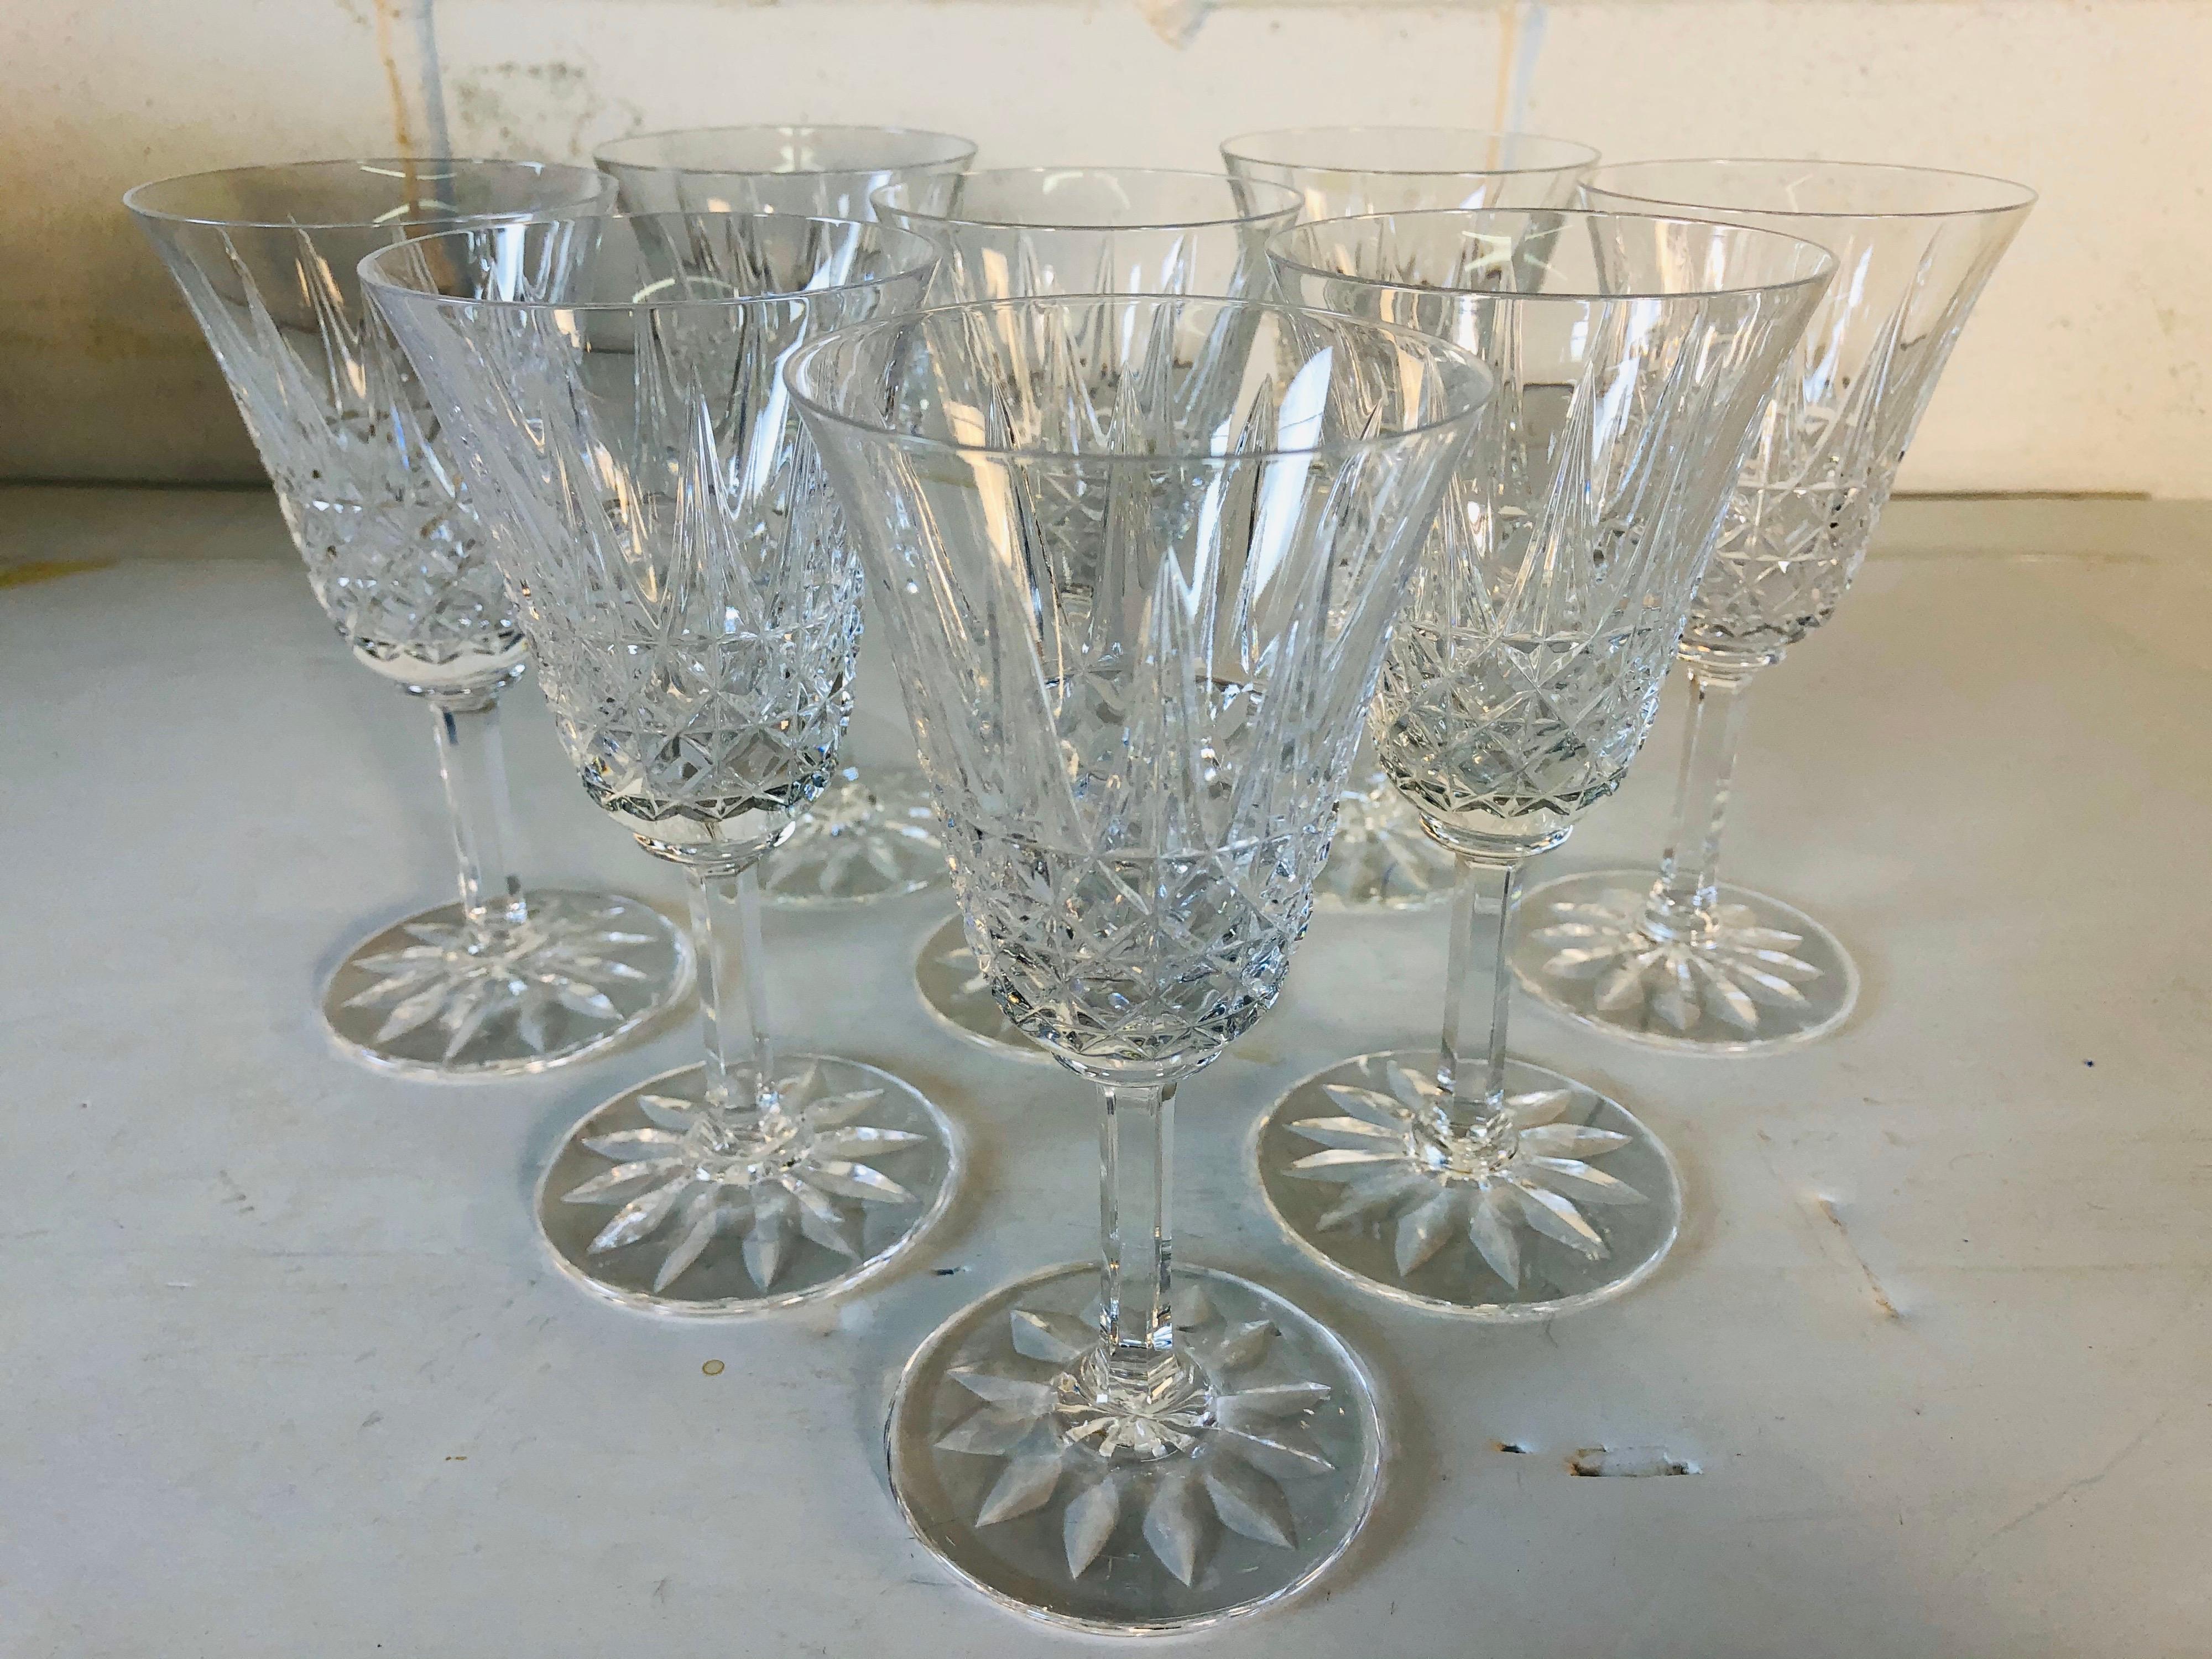 Vintage set of 8 French St. Louis glass wine stems in the tarn pattern. The stems are all hand blown and in excellent condition. Marked underneath.